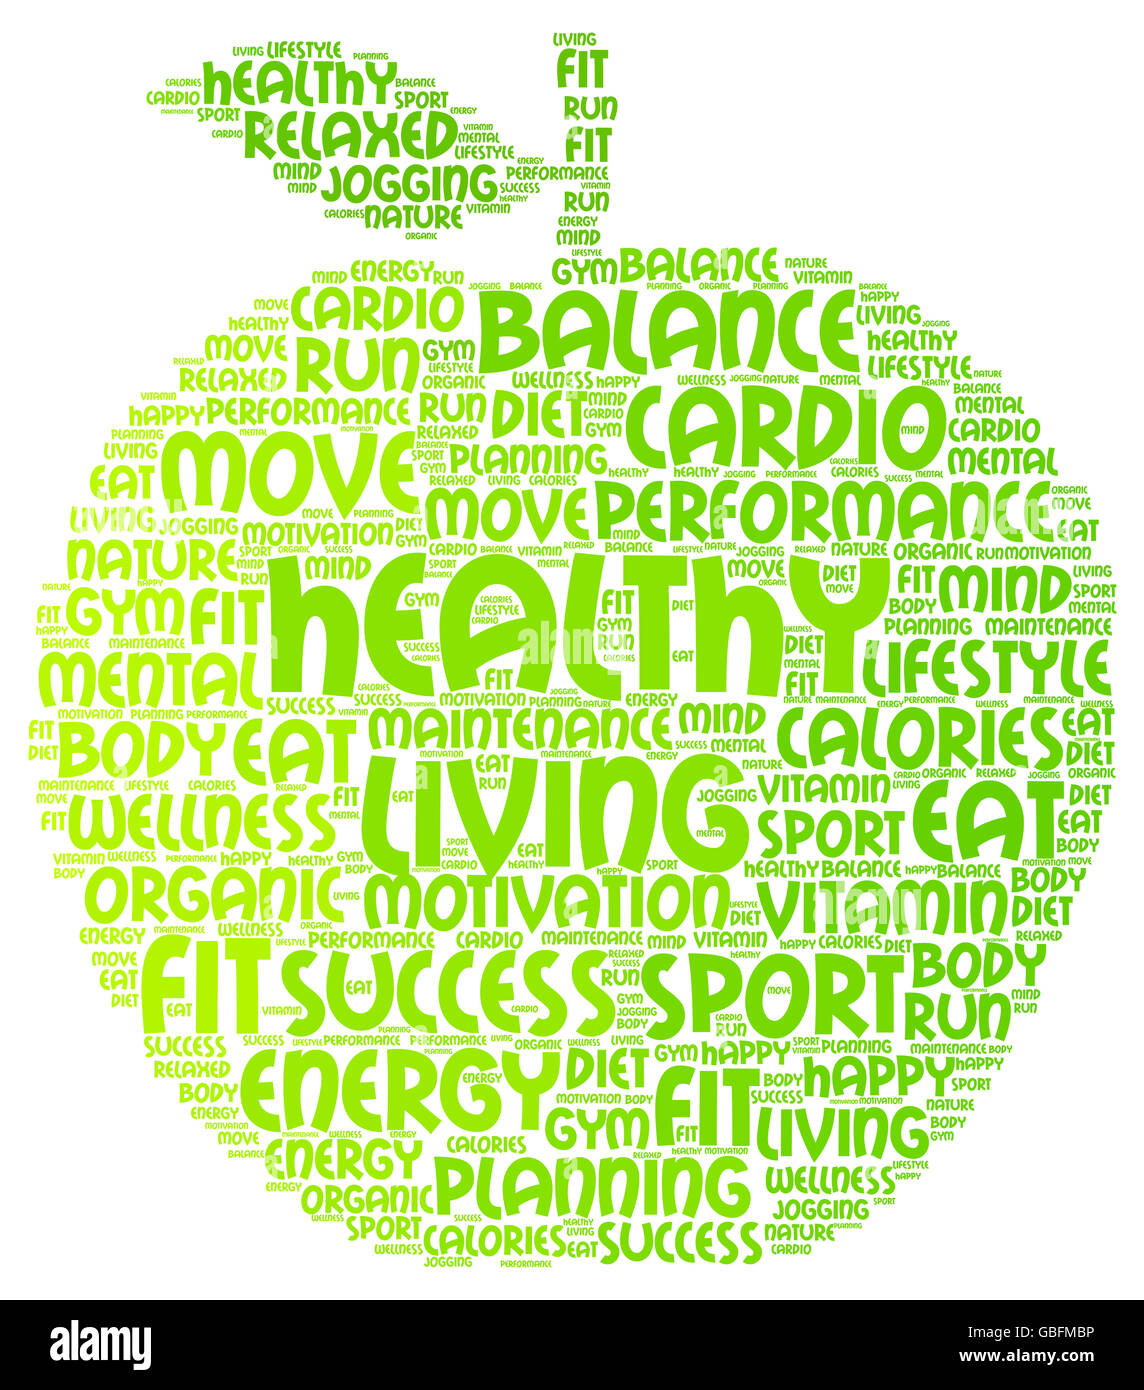 Healthy living word cloud in apple shape Stock Photo